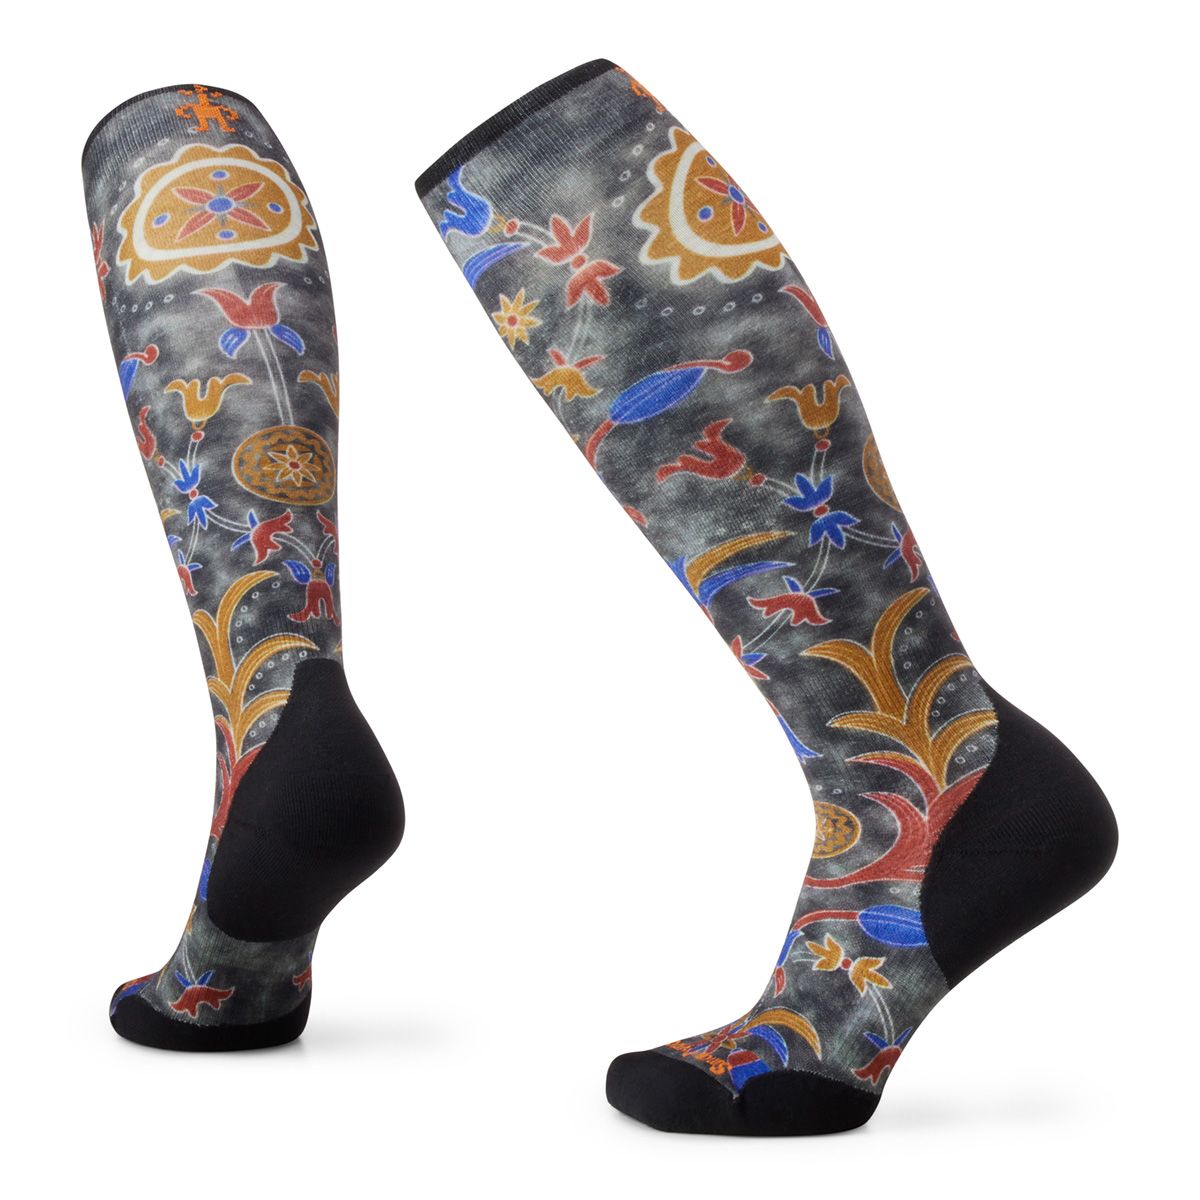 Feel like total royalty on your ski runs with our Women's Ski Targeted Cushion Royal Floral Print Over the Calf Socks. 